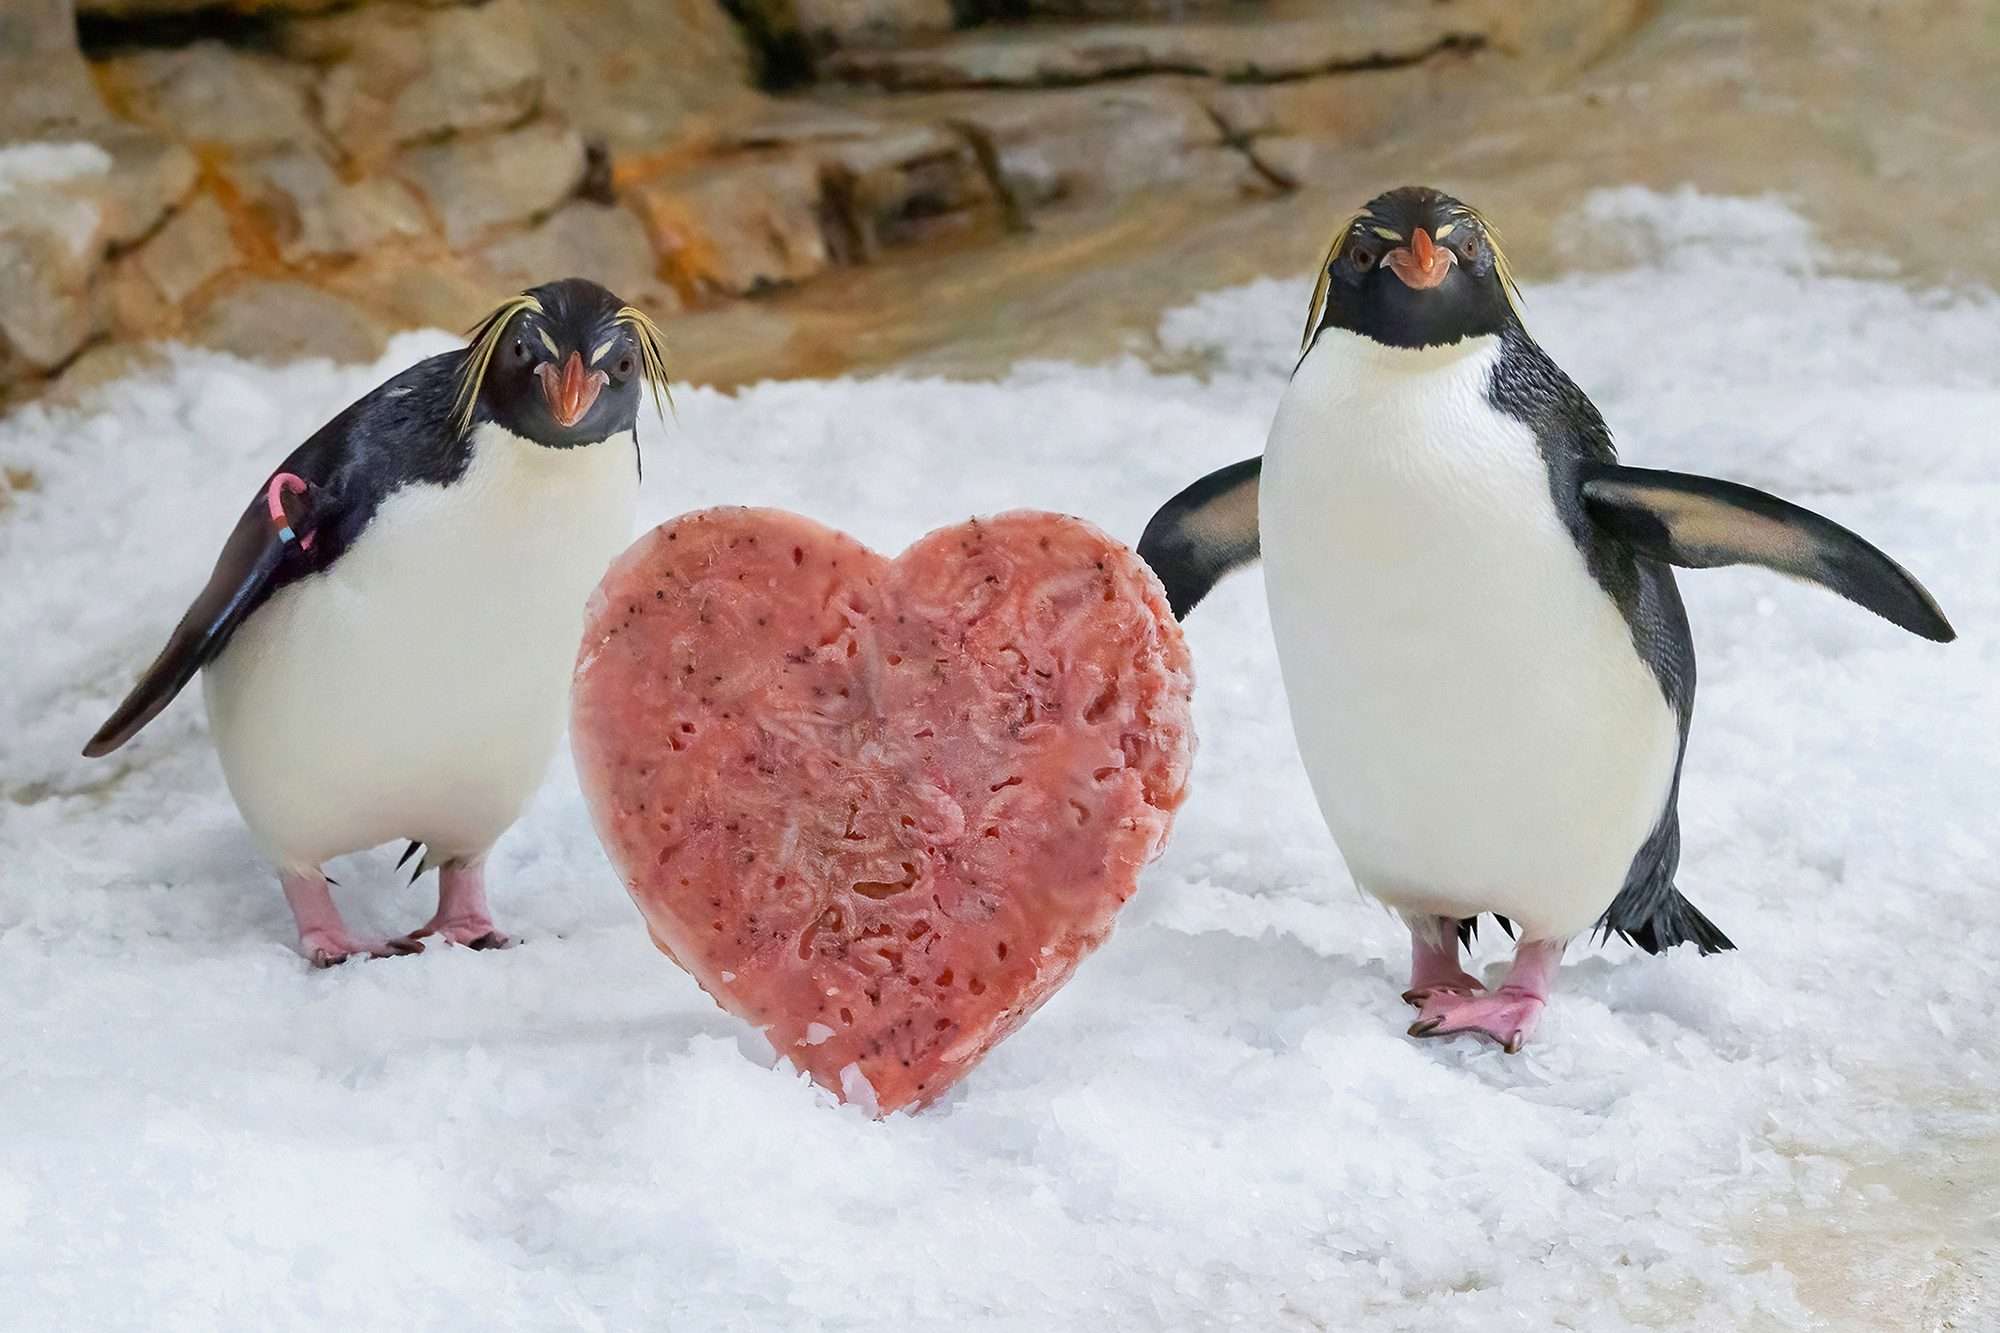 Read more about the article Penguins From World’s Oldest Zoo Receive A Special Heart-Shaped Treat For Valentine’s Day